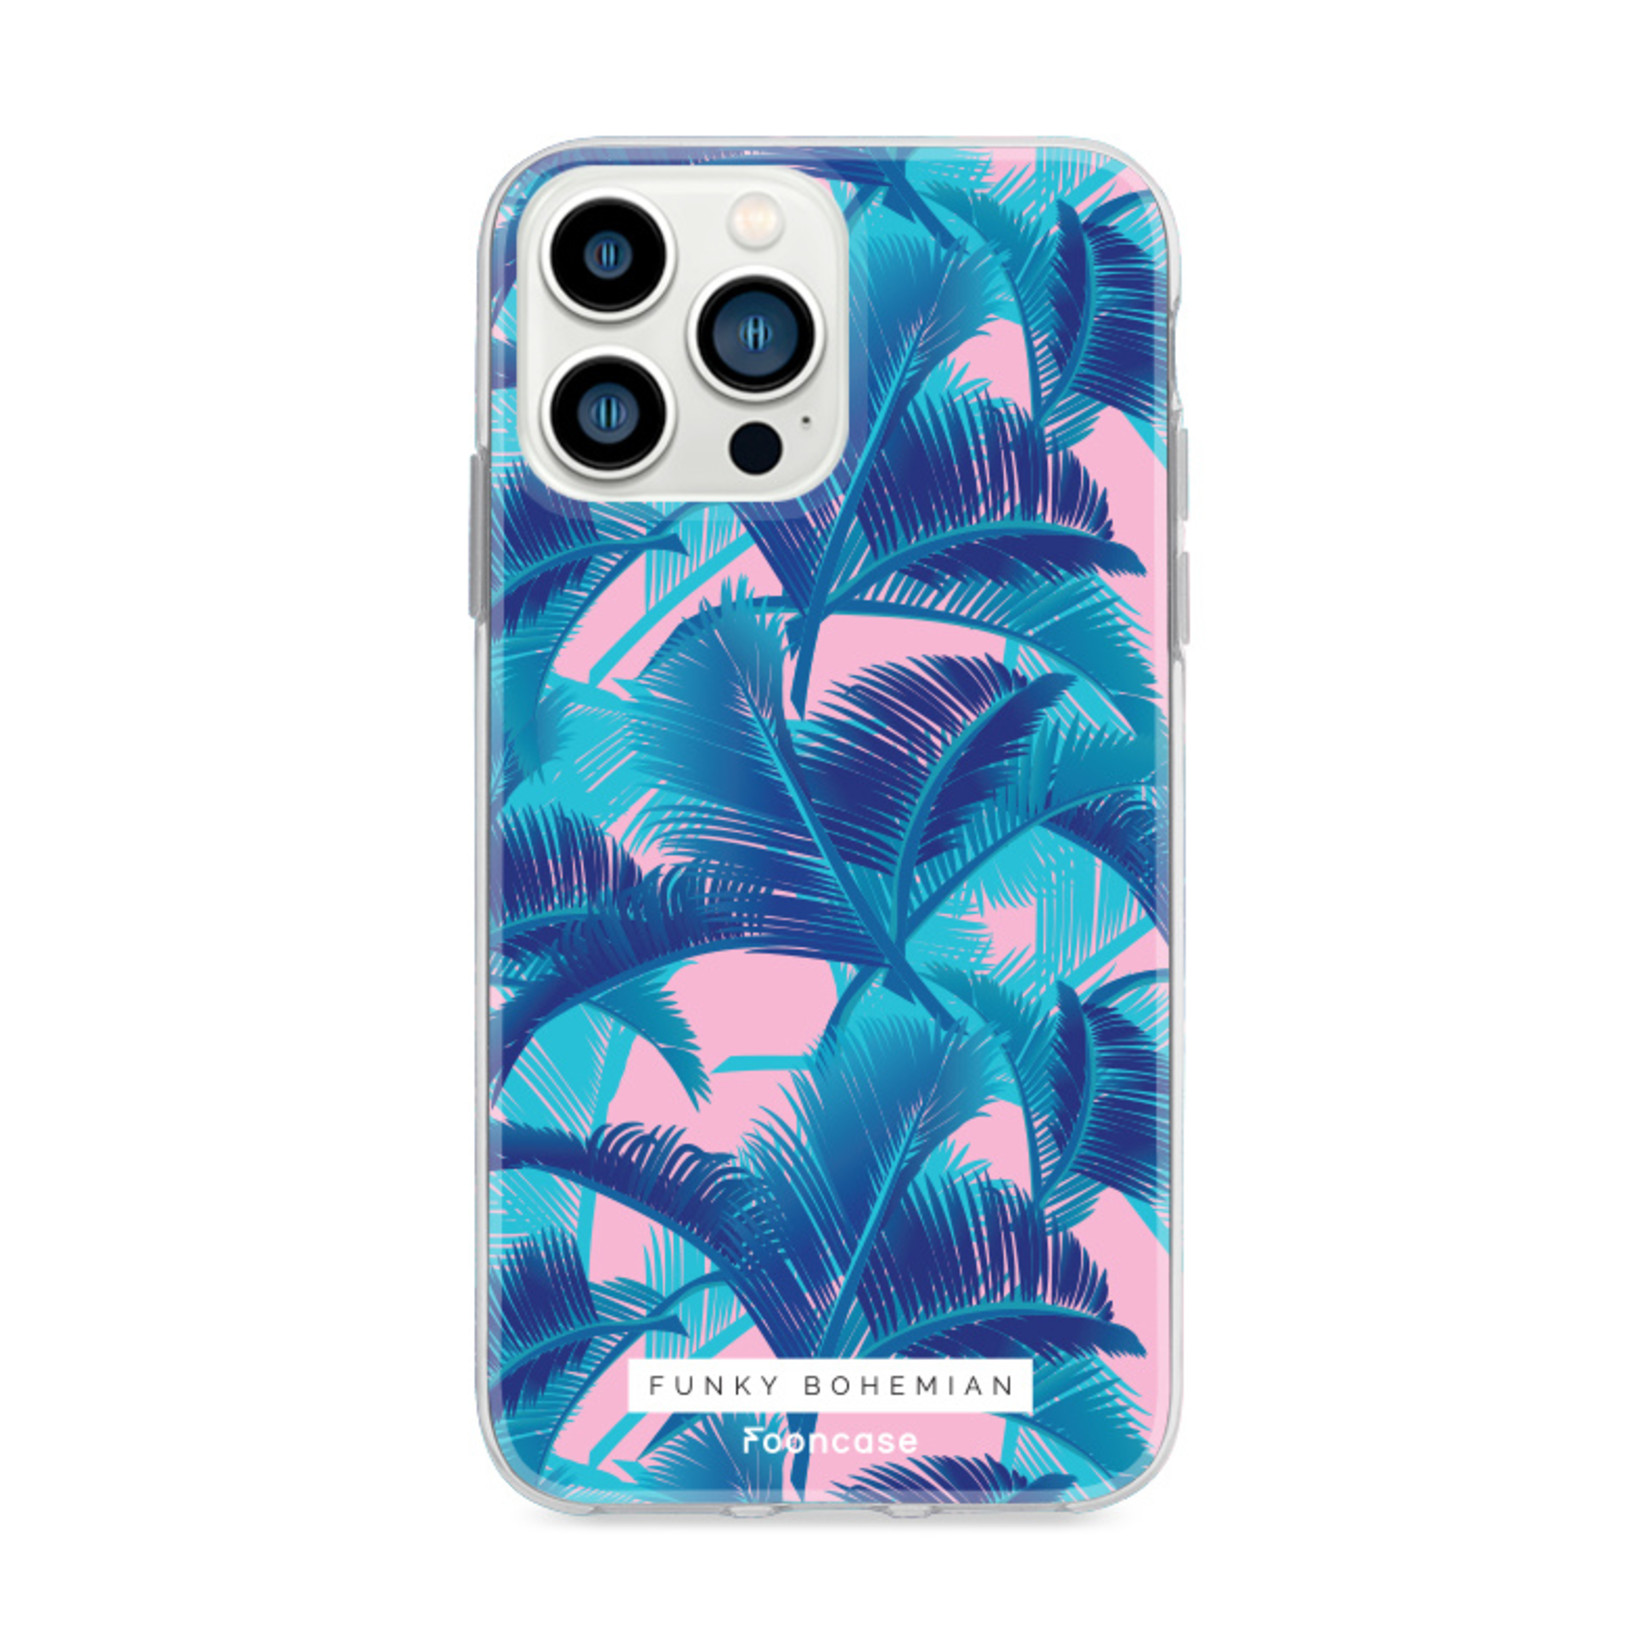 FOONCASE iPhone 13 Pro Max hoesje TPU Soft Case - Back Cover - Funky Bohemian / Blauw Roze Bladeren